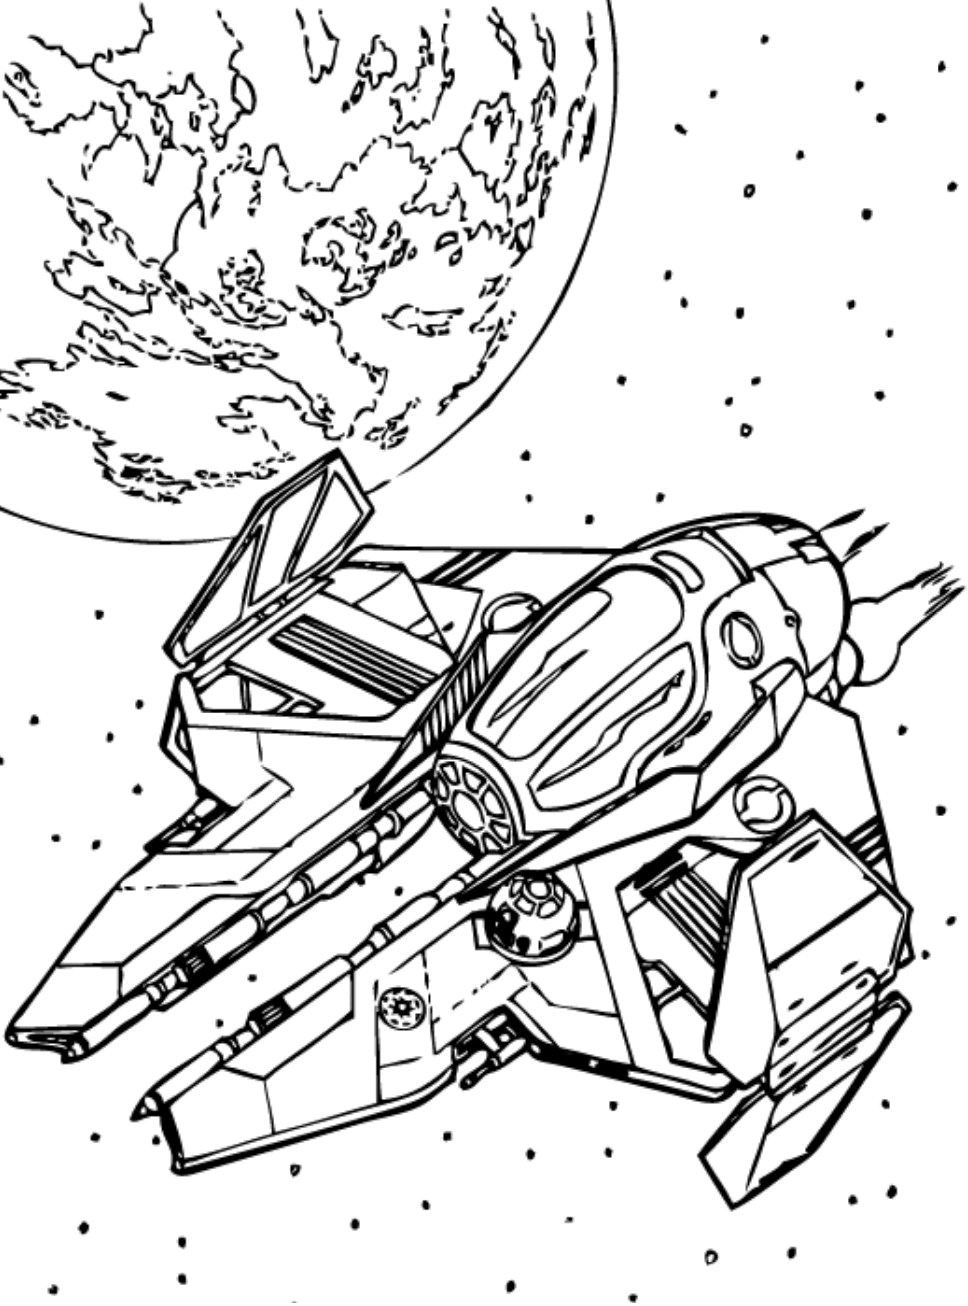 Star Wars Colouring Pages Obi Wan Kenobi - bmp-connect